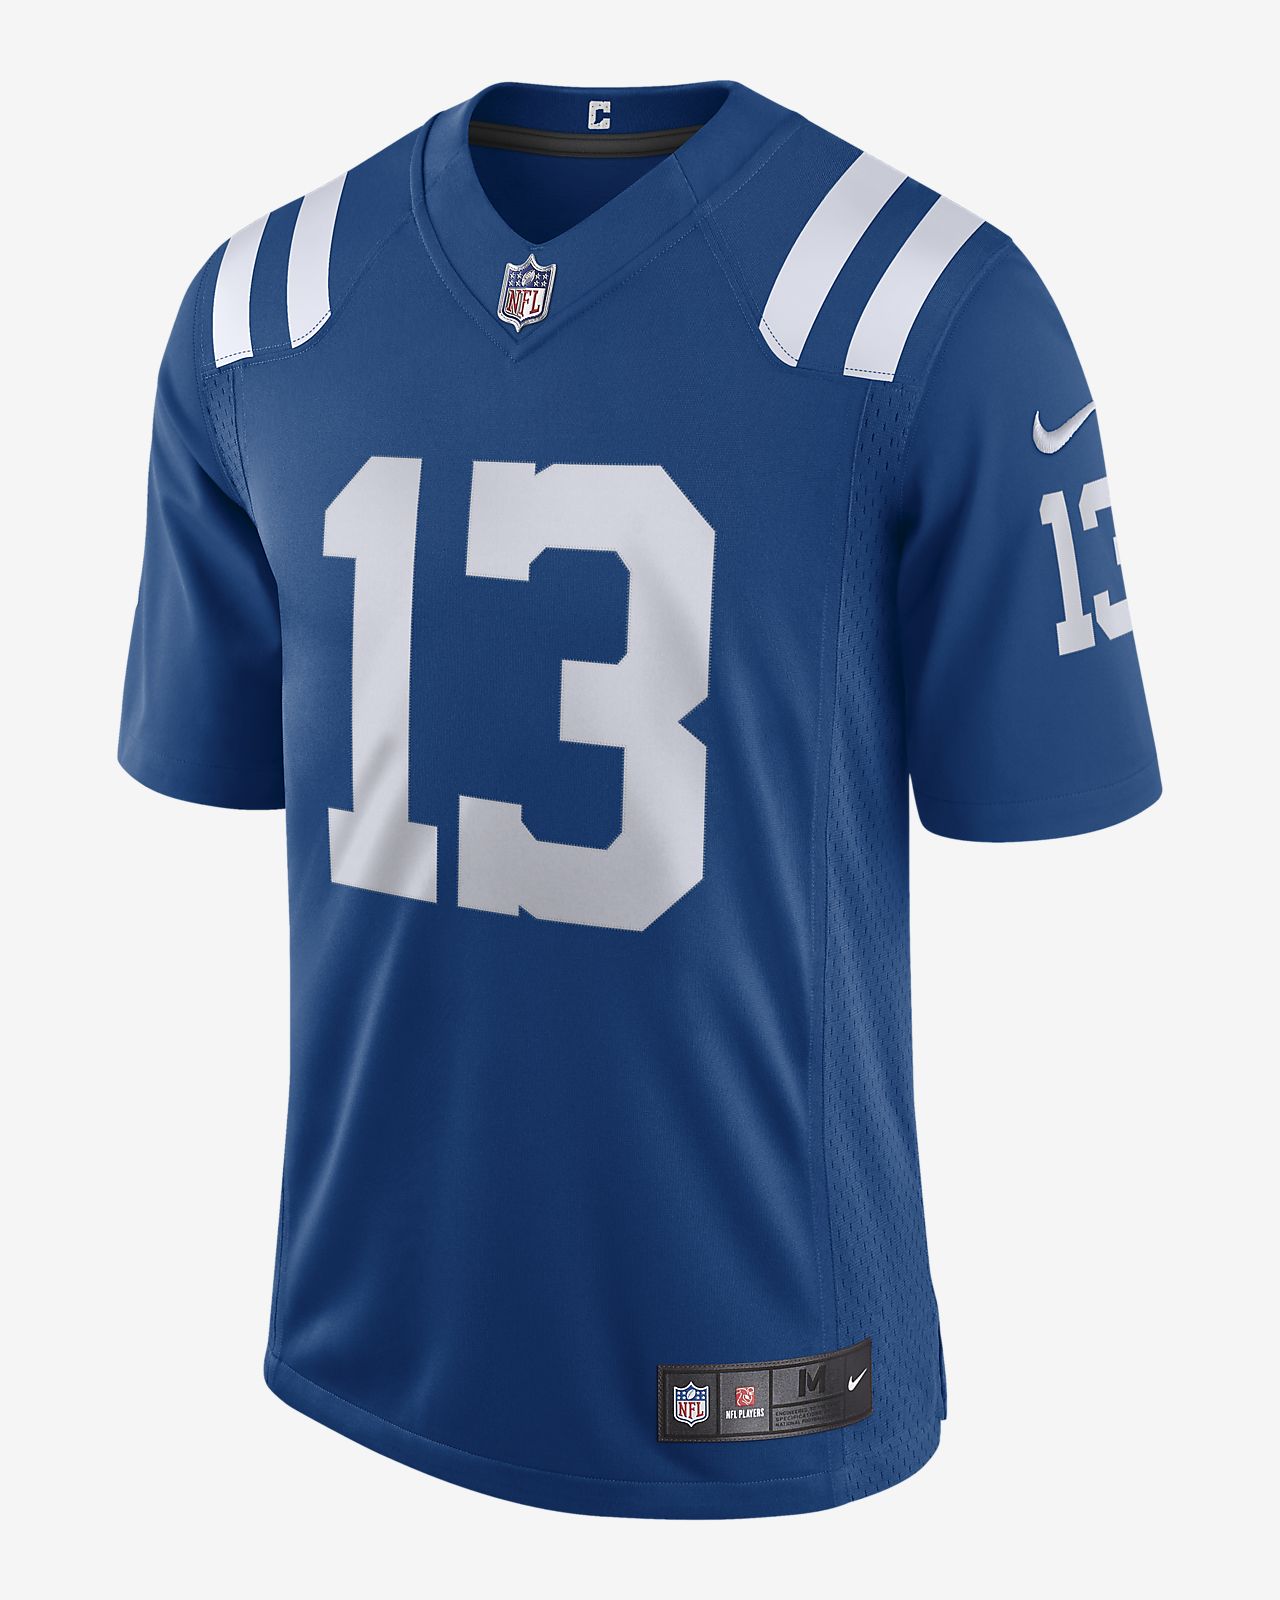 jersey indianapolis colts jersey on sale